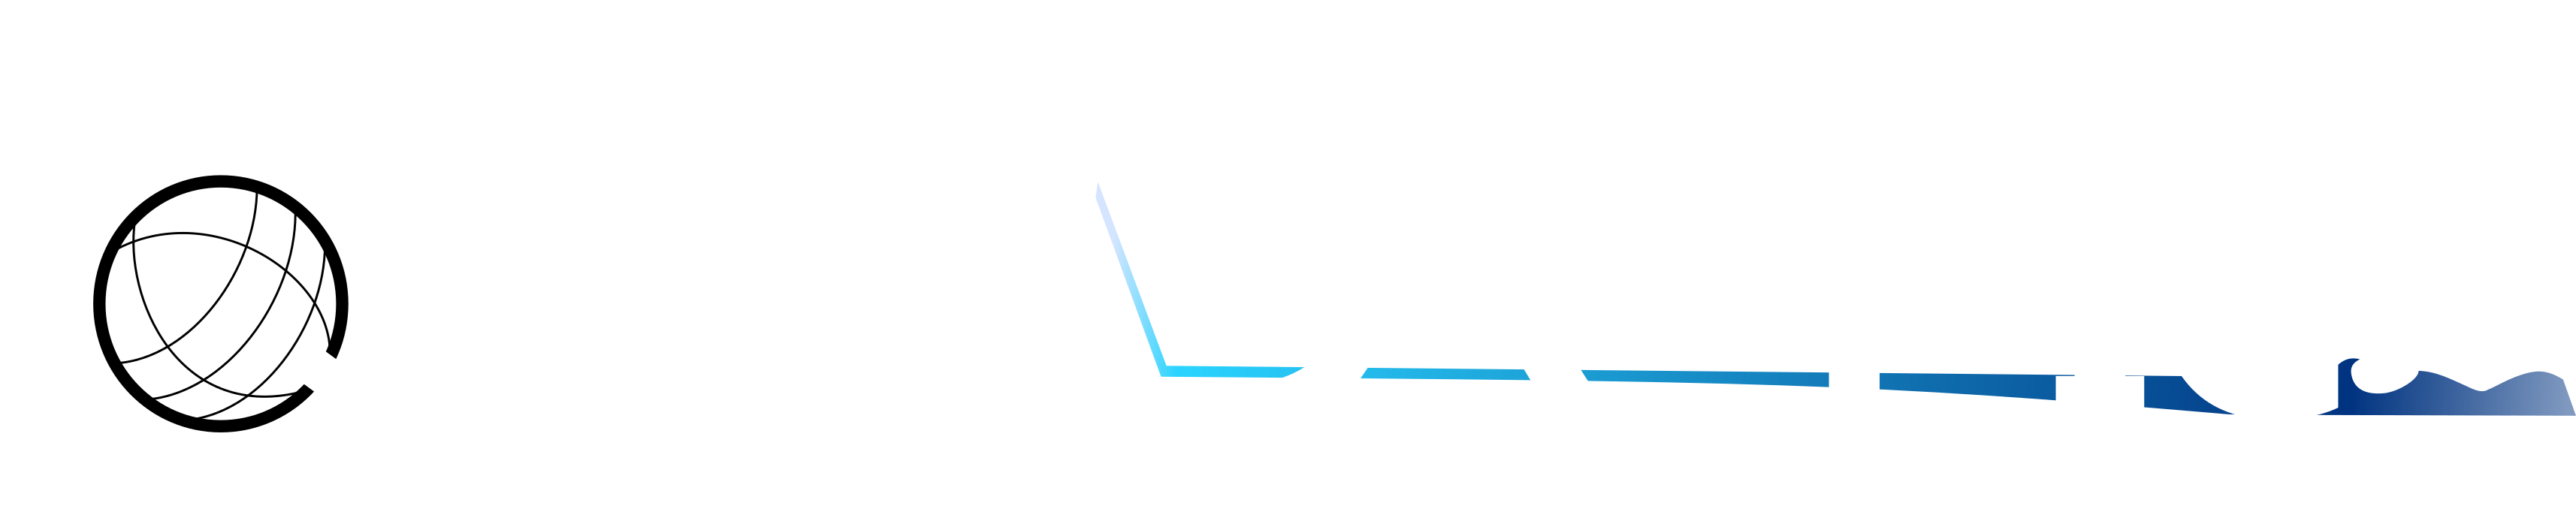 Text logo with the word GEOMORPHICA in uppercase black letters. The upper case G has a globe inside it, connected to the horizontal line of the letter. The M is made by two mowntains covered in snow. The right mountain is higher than the left one. At the foot of the mountain there is some topographic relief. The 'terrain' is higher at the letter 'O' (covers 10% of the letter) and gets thinner as it goes right, disappearing below the 'C'. Above this relief, there is a blue shade suggesting the presence of a river that flows from the mountains towards the ocean (ocean below letters C and A). 